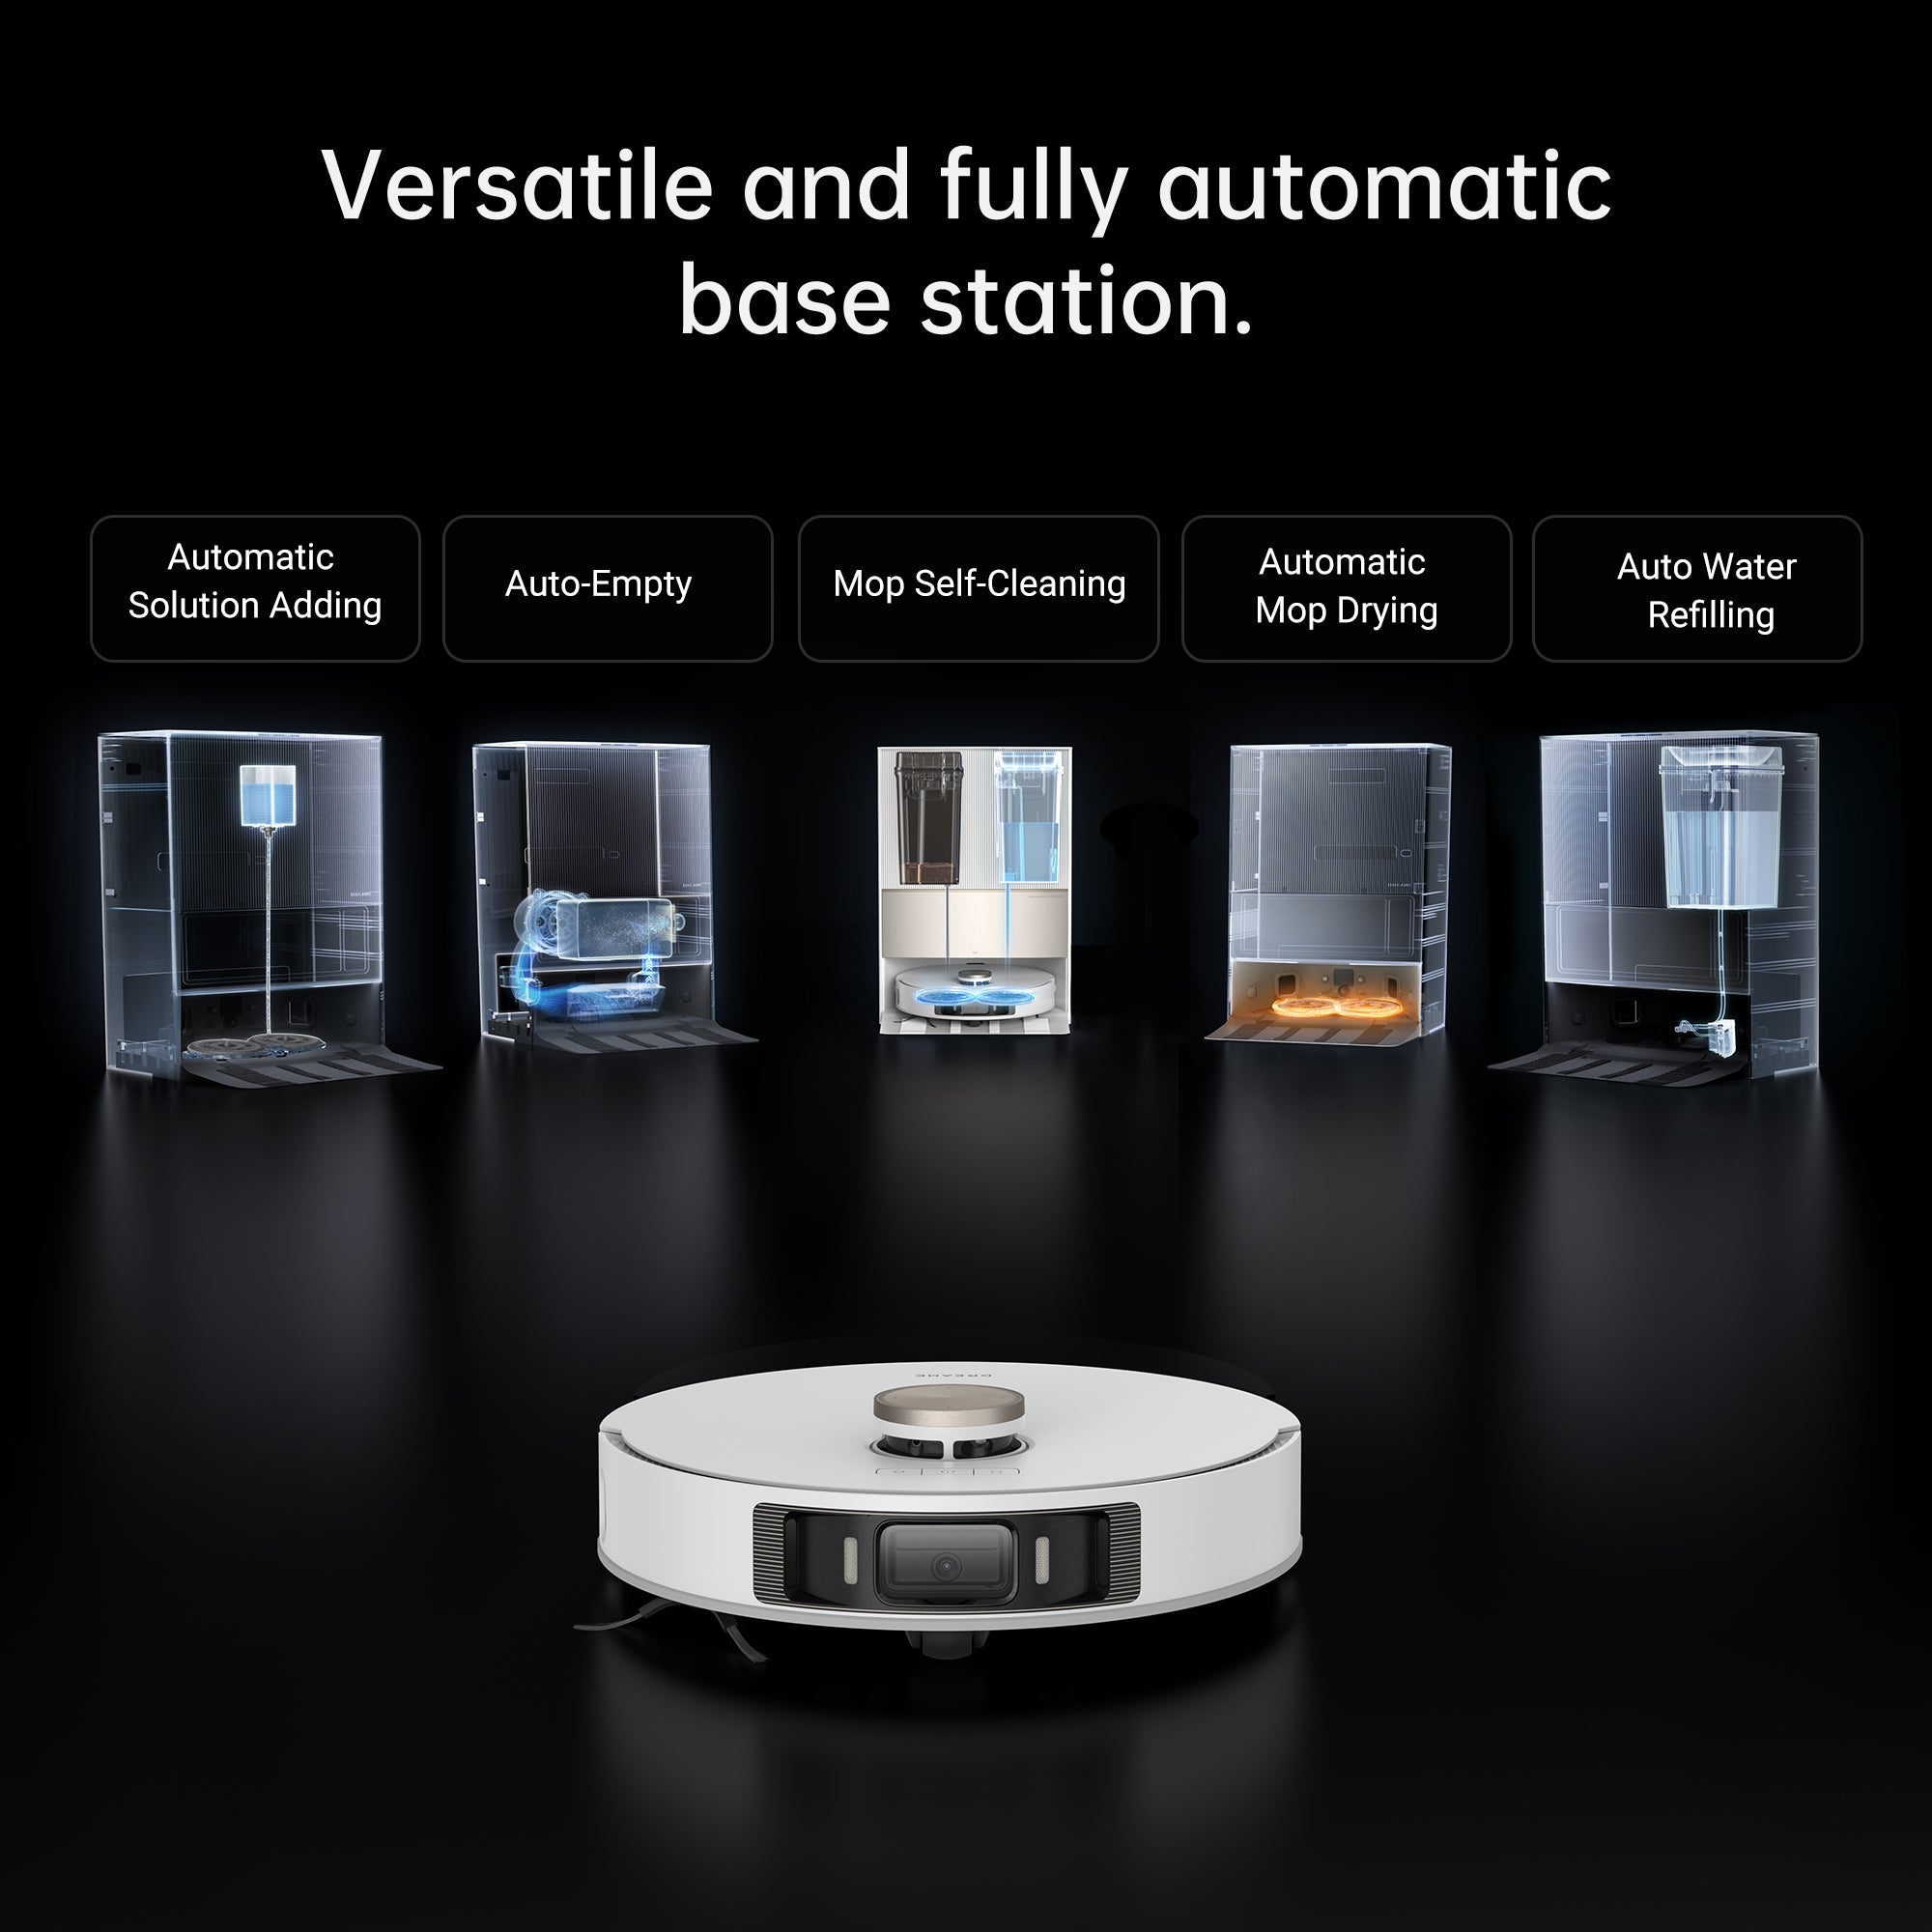 Dreame L20 Ultra Robot Vacuum and Mop Cleaner with Auto Mop Cleaning and Drying, Self-Refilling and Self-Emptying Base Station